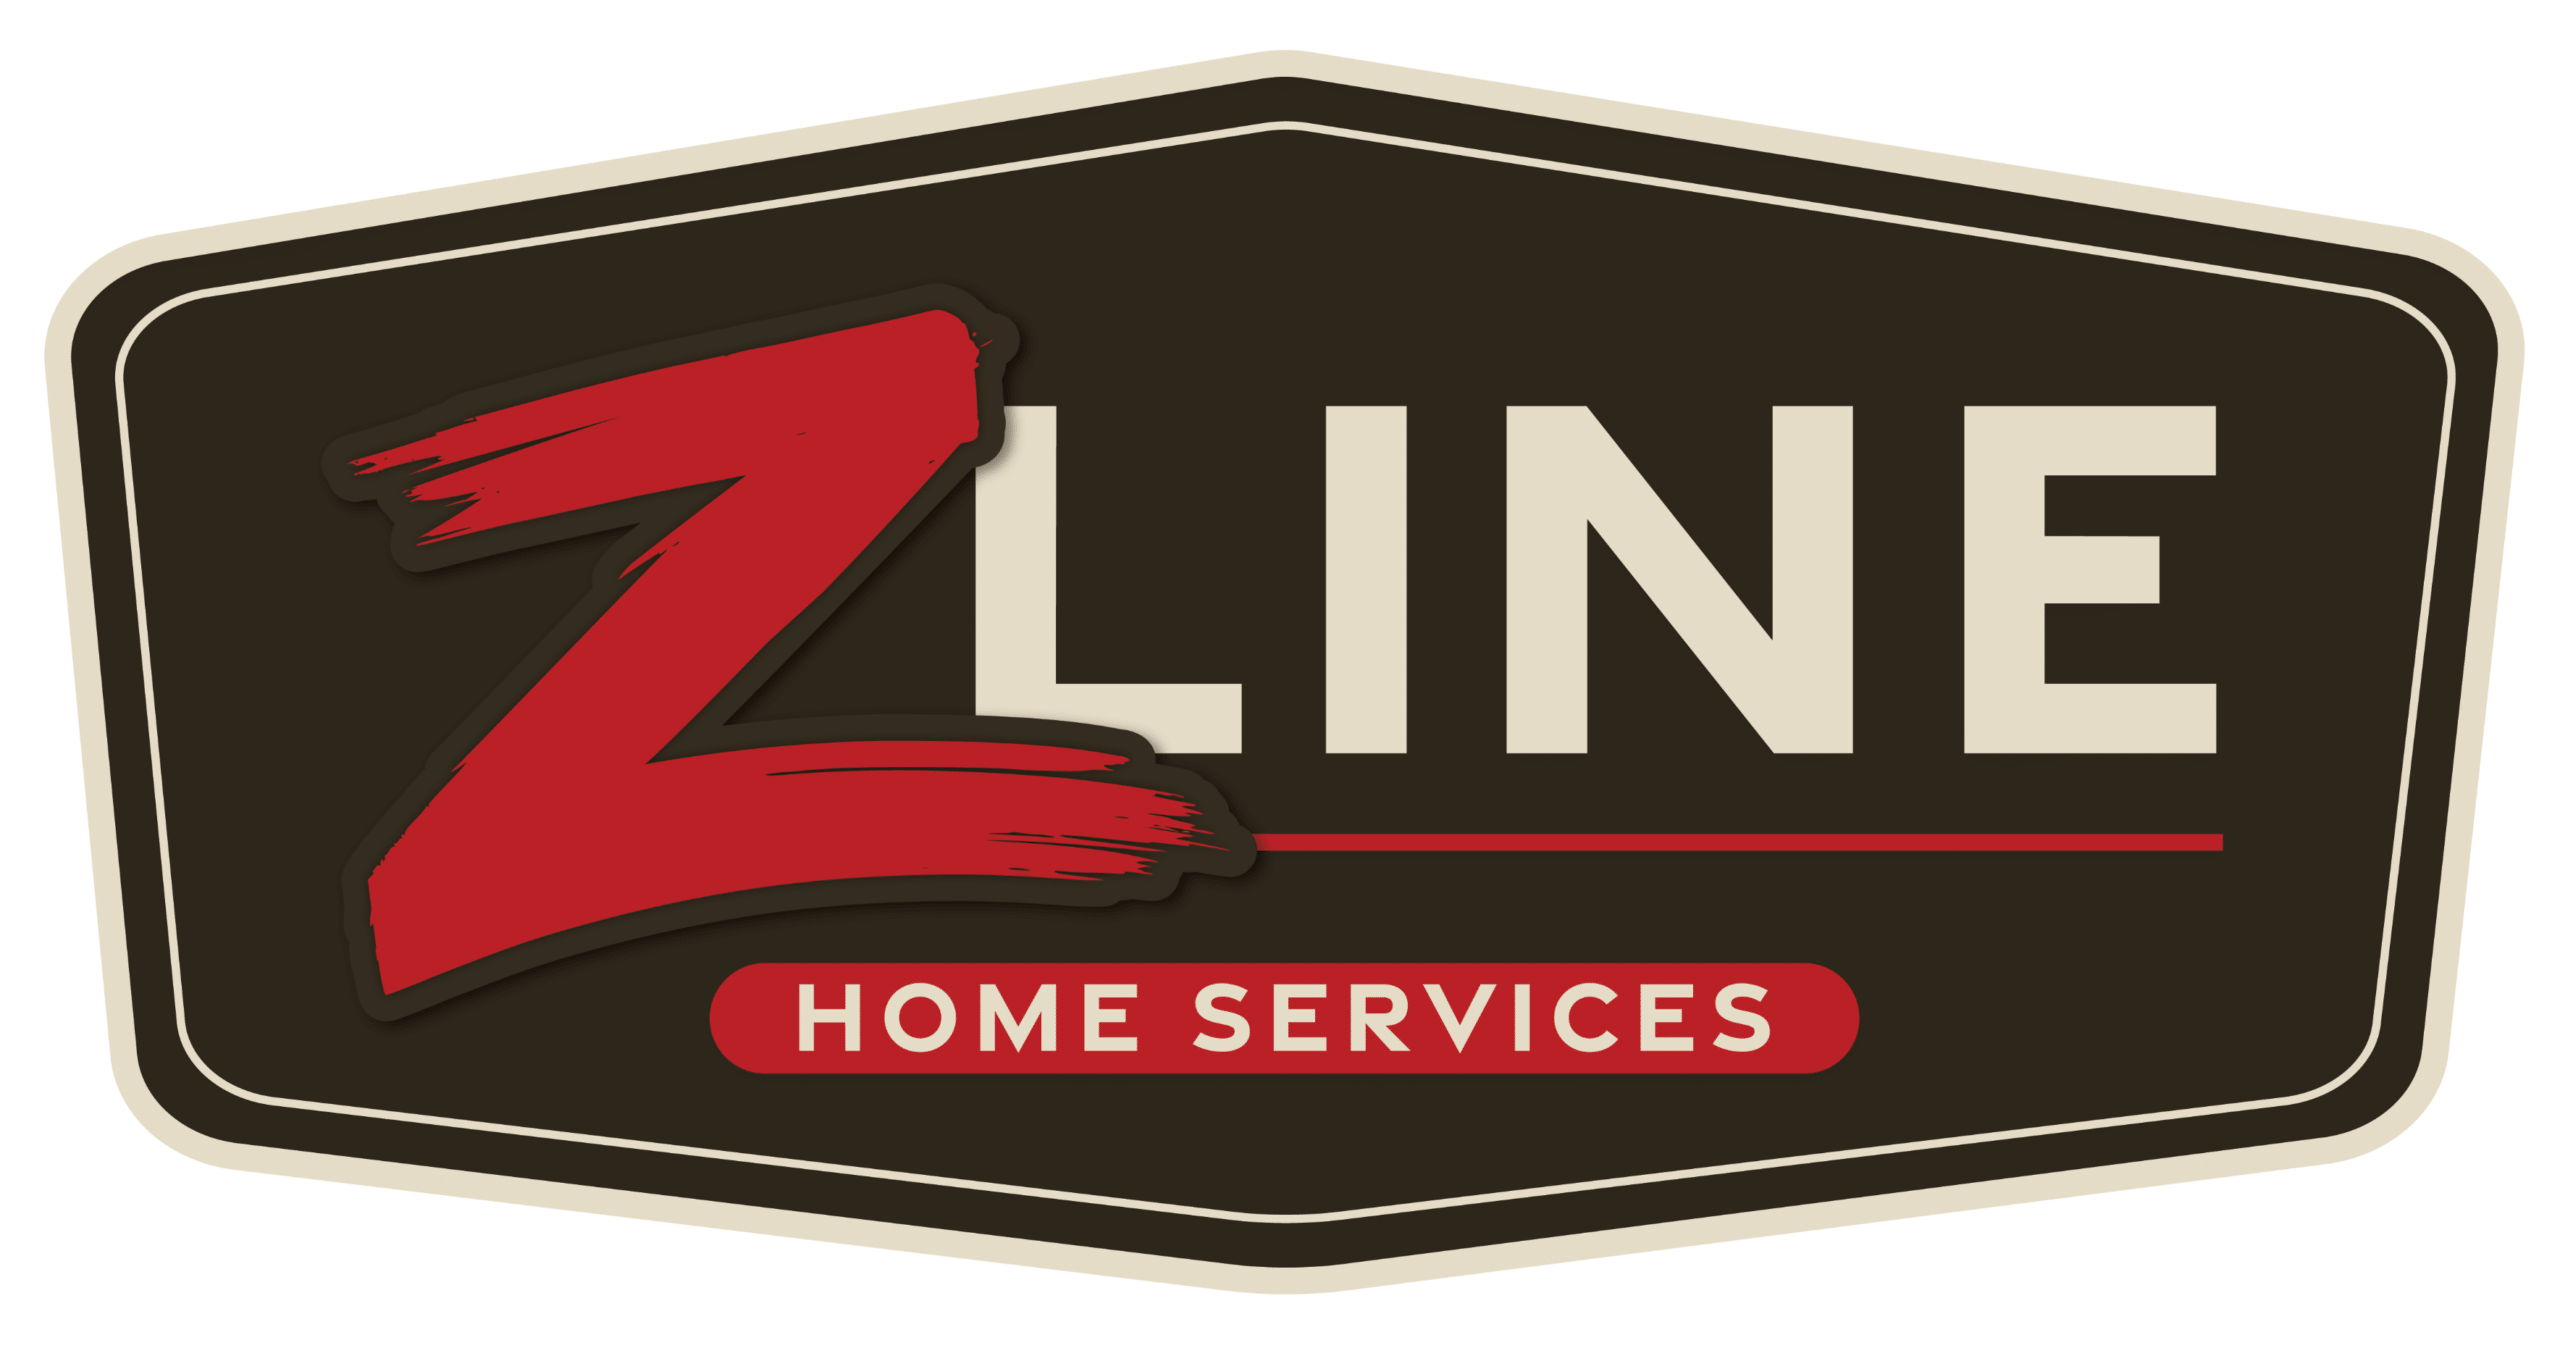 Z-Line Handyman Services – Your Home is Covered from A to Z